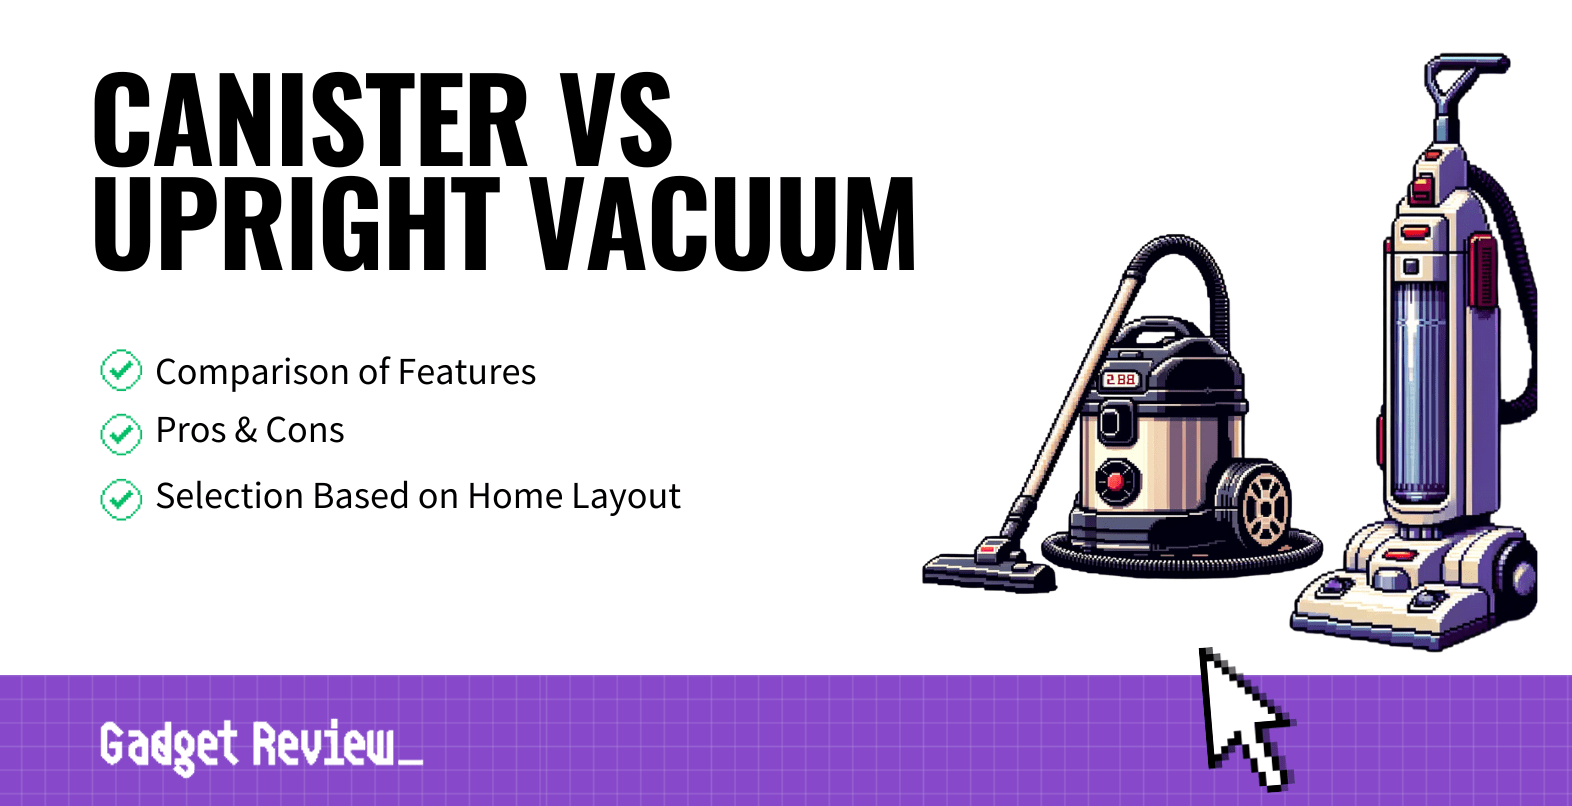 Canister vs Upright Vacuum